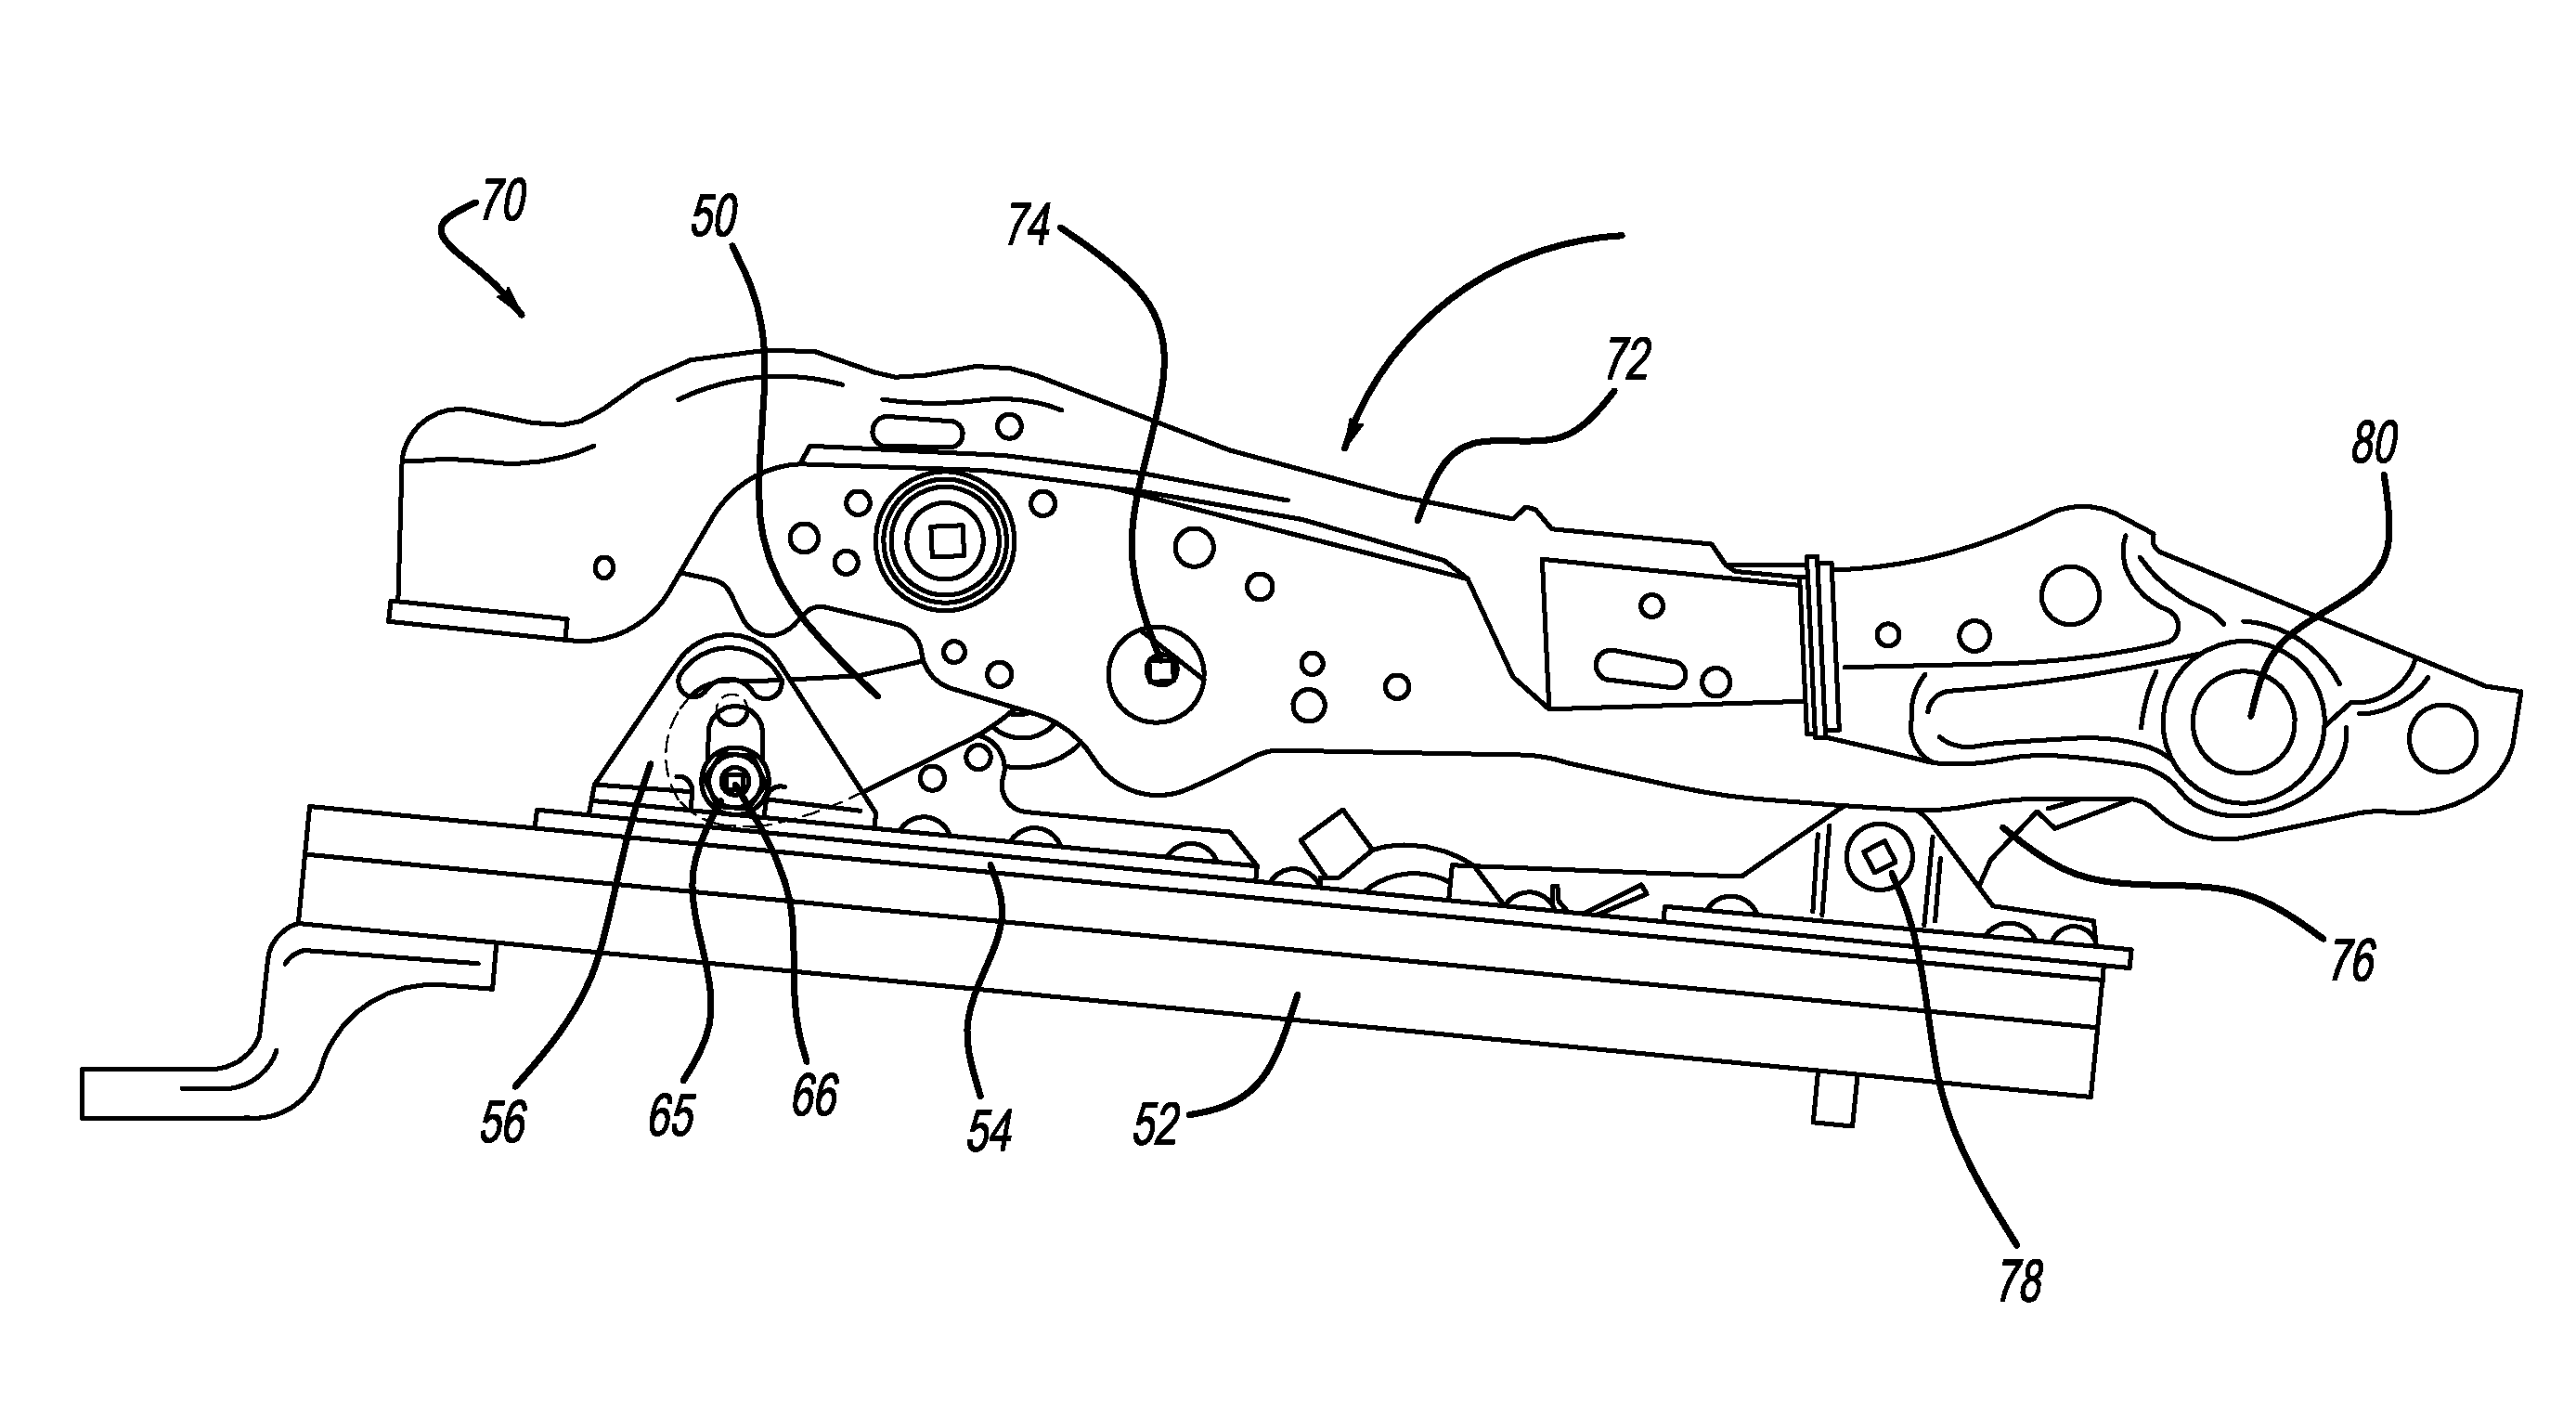 Pyrotechnic fastener seat arrangement for unbelted occupant protection